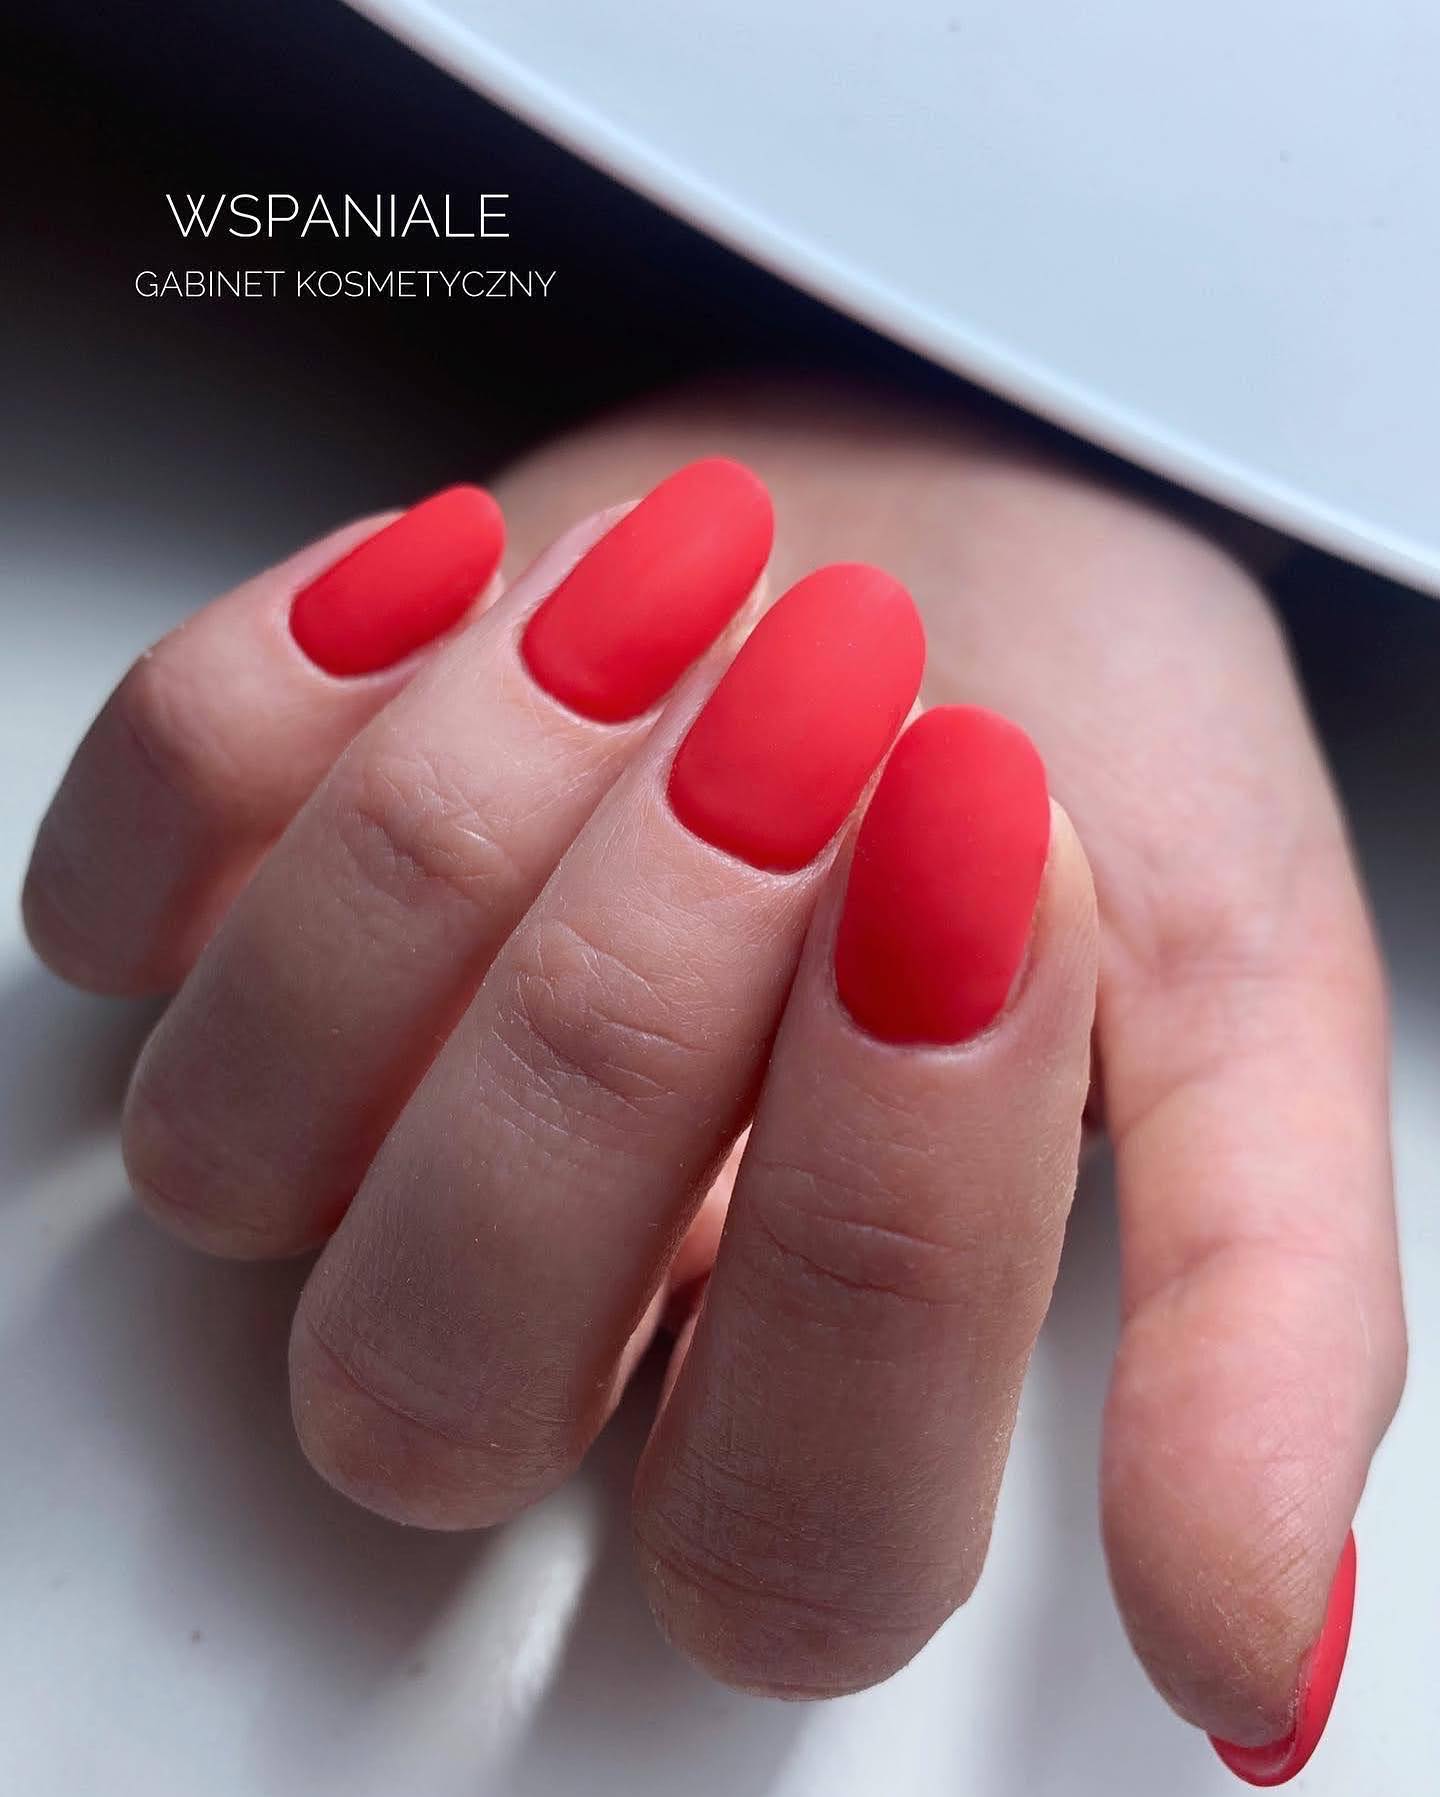 Brighten up your nails with a sexy and vibrant shade of red like these. Being one of the classics, blood red matte nails are ready to make a statement.